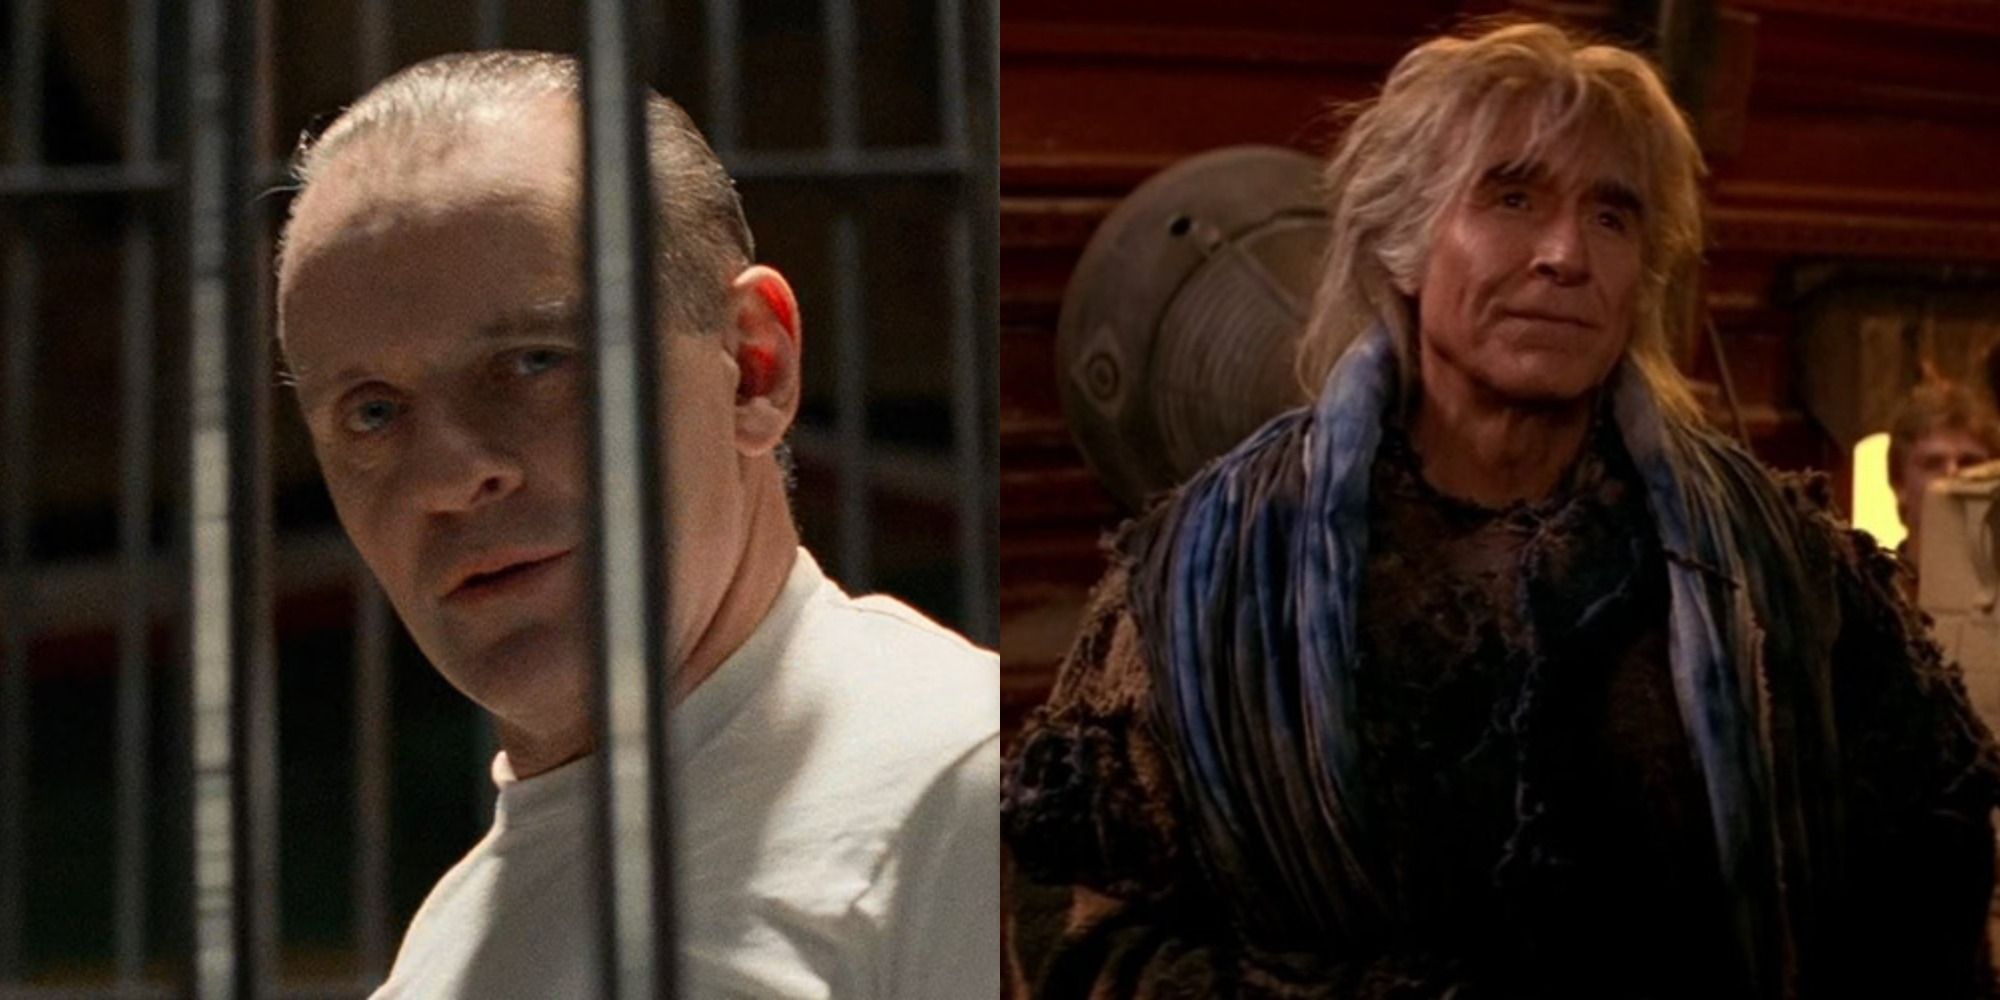 Hannibal from Silence of the Lambs and Khan from Star Trek